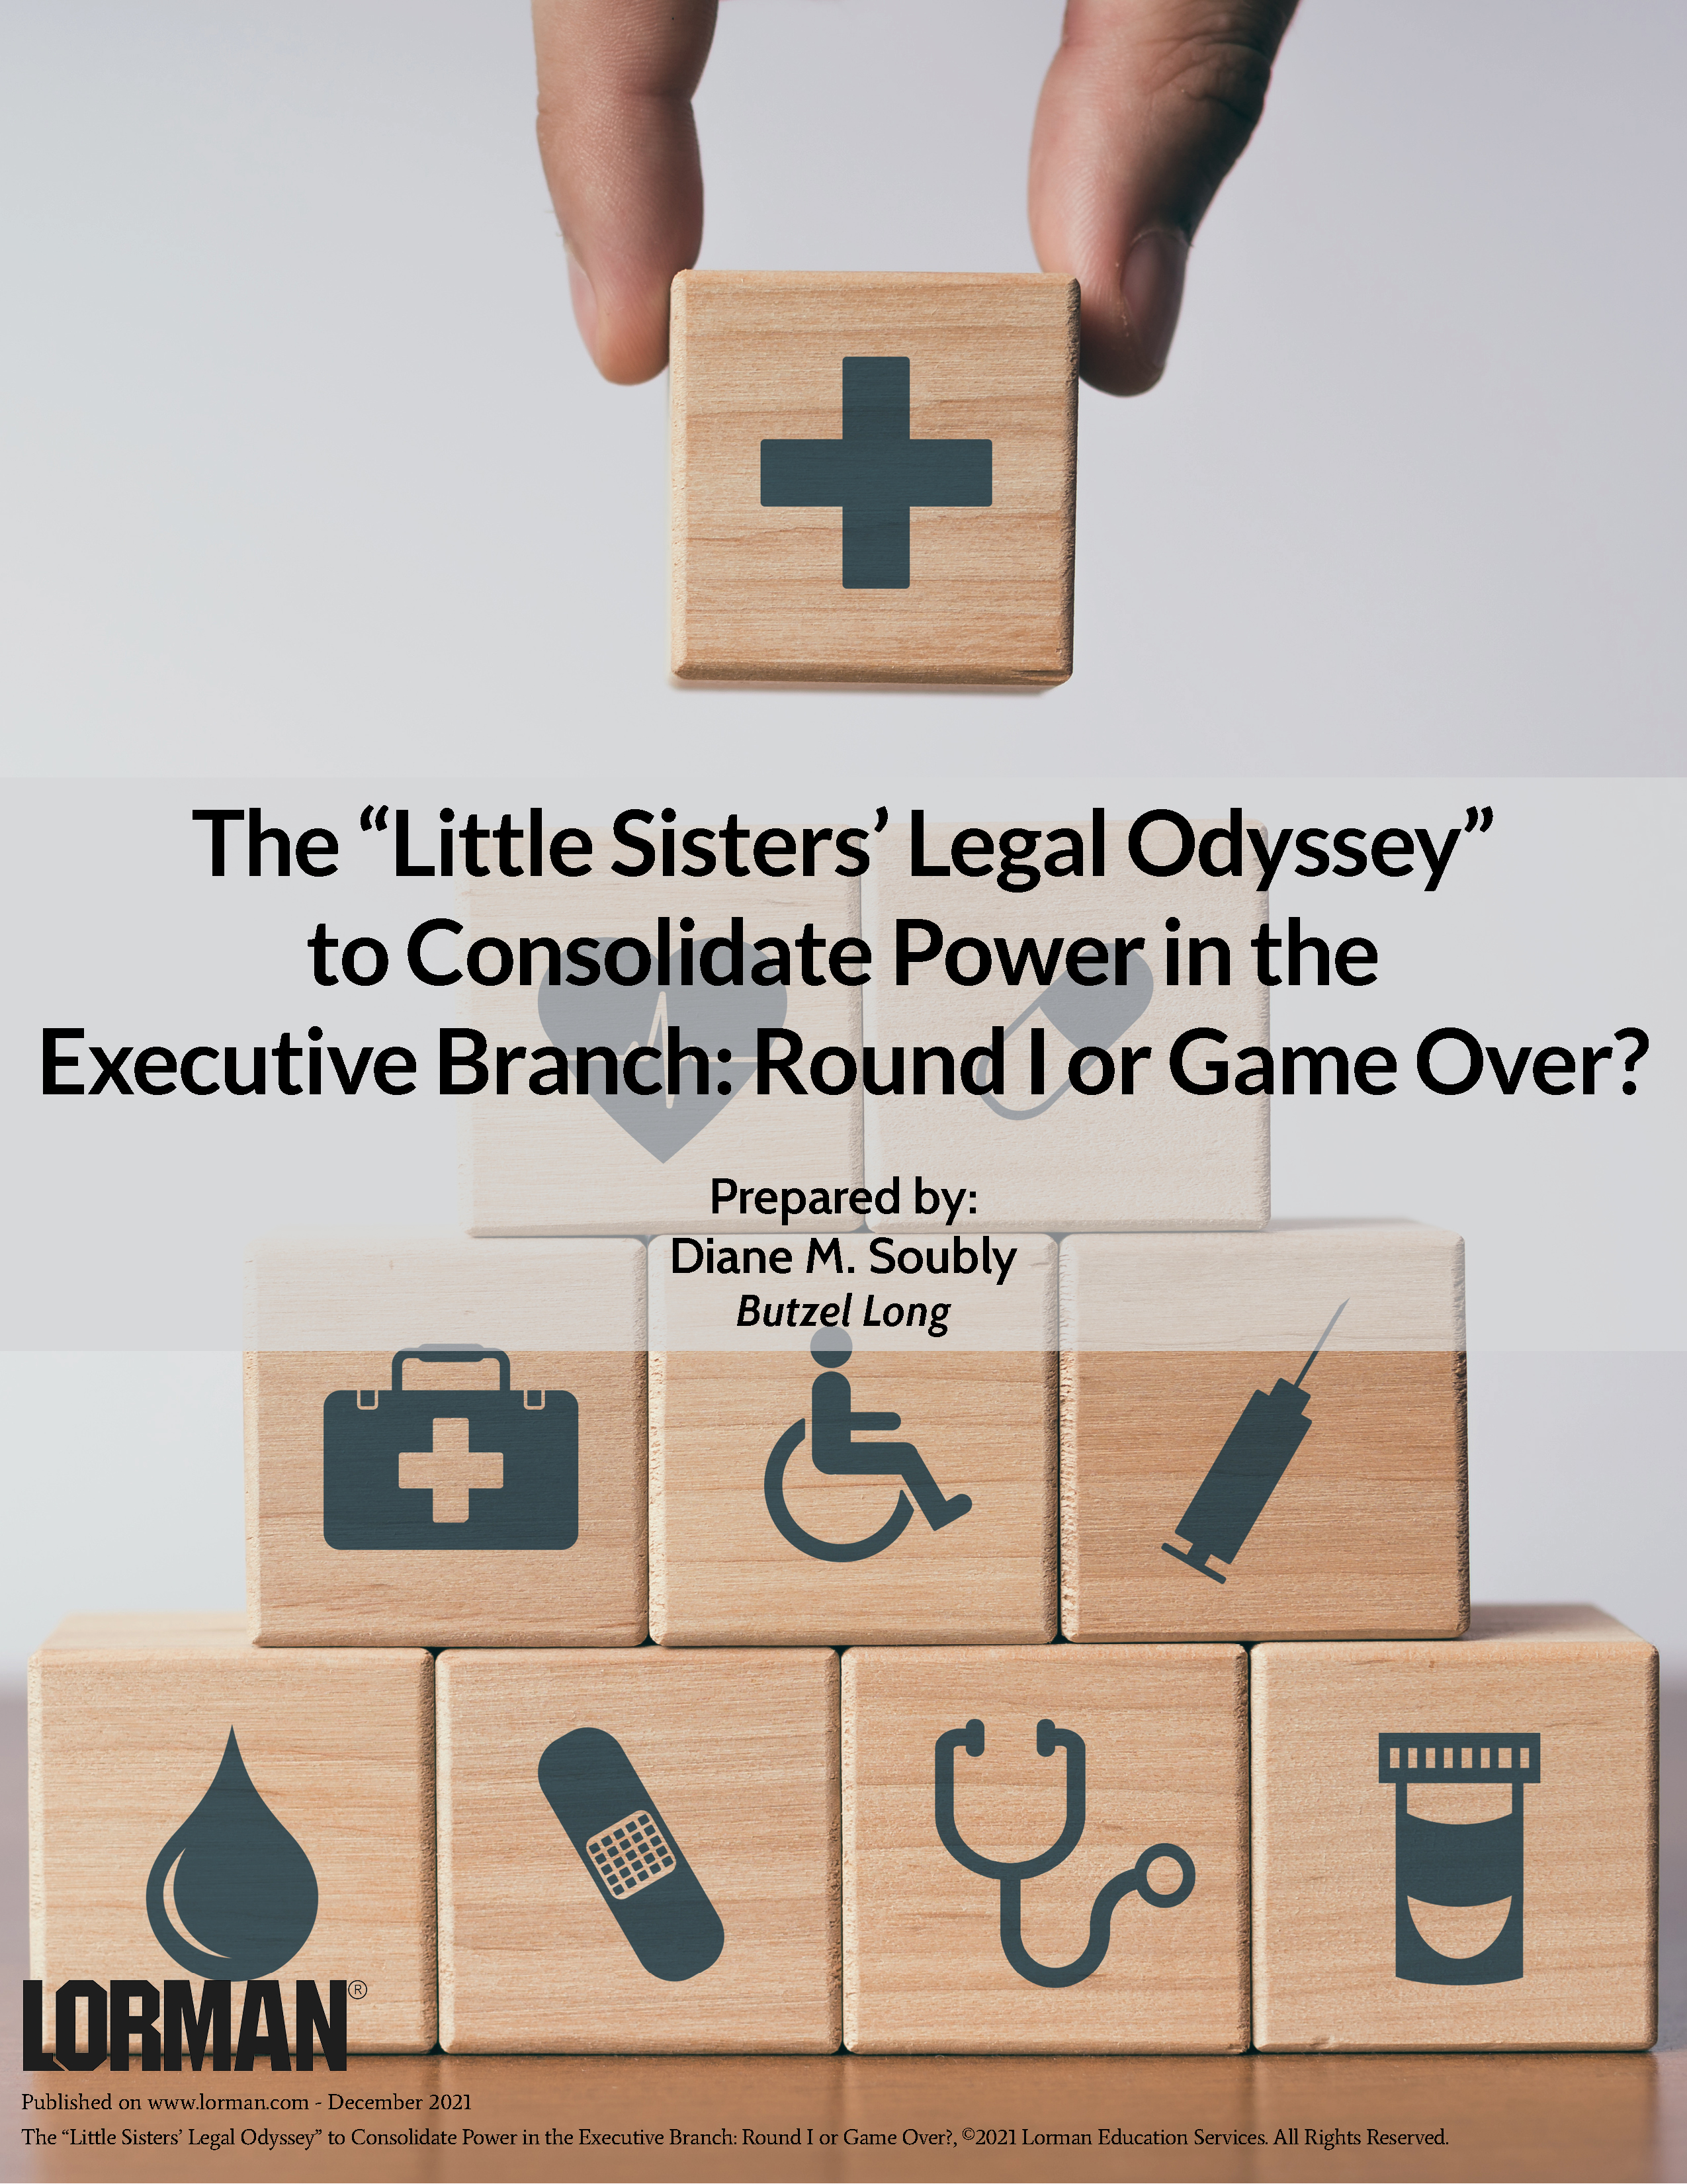 The “Little Sisters’ Legal Odyssey” to Consolidate Power in the Executive Branch